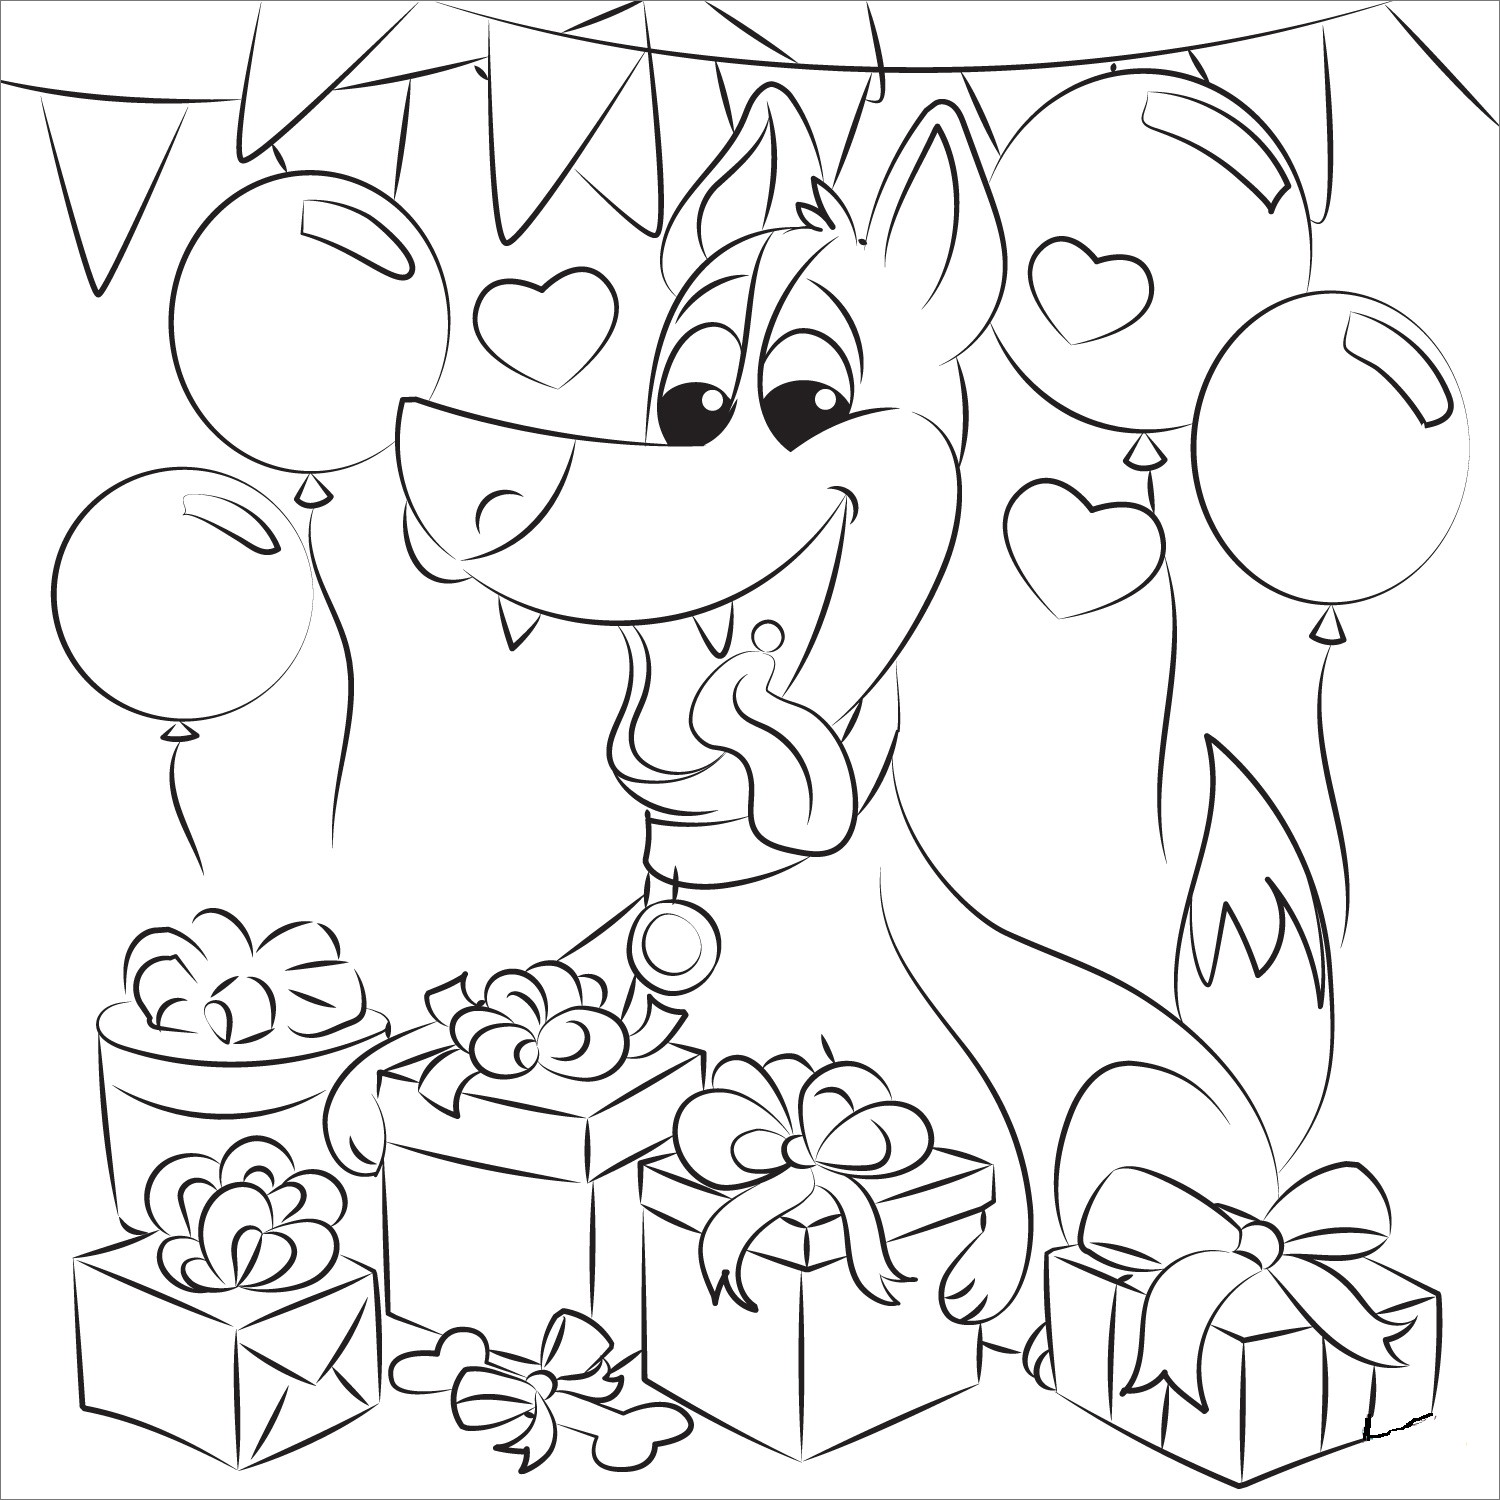 Dogs Birthday Coloring Page